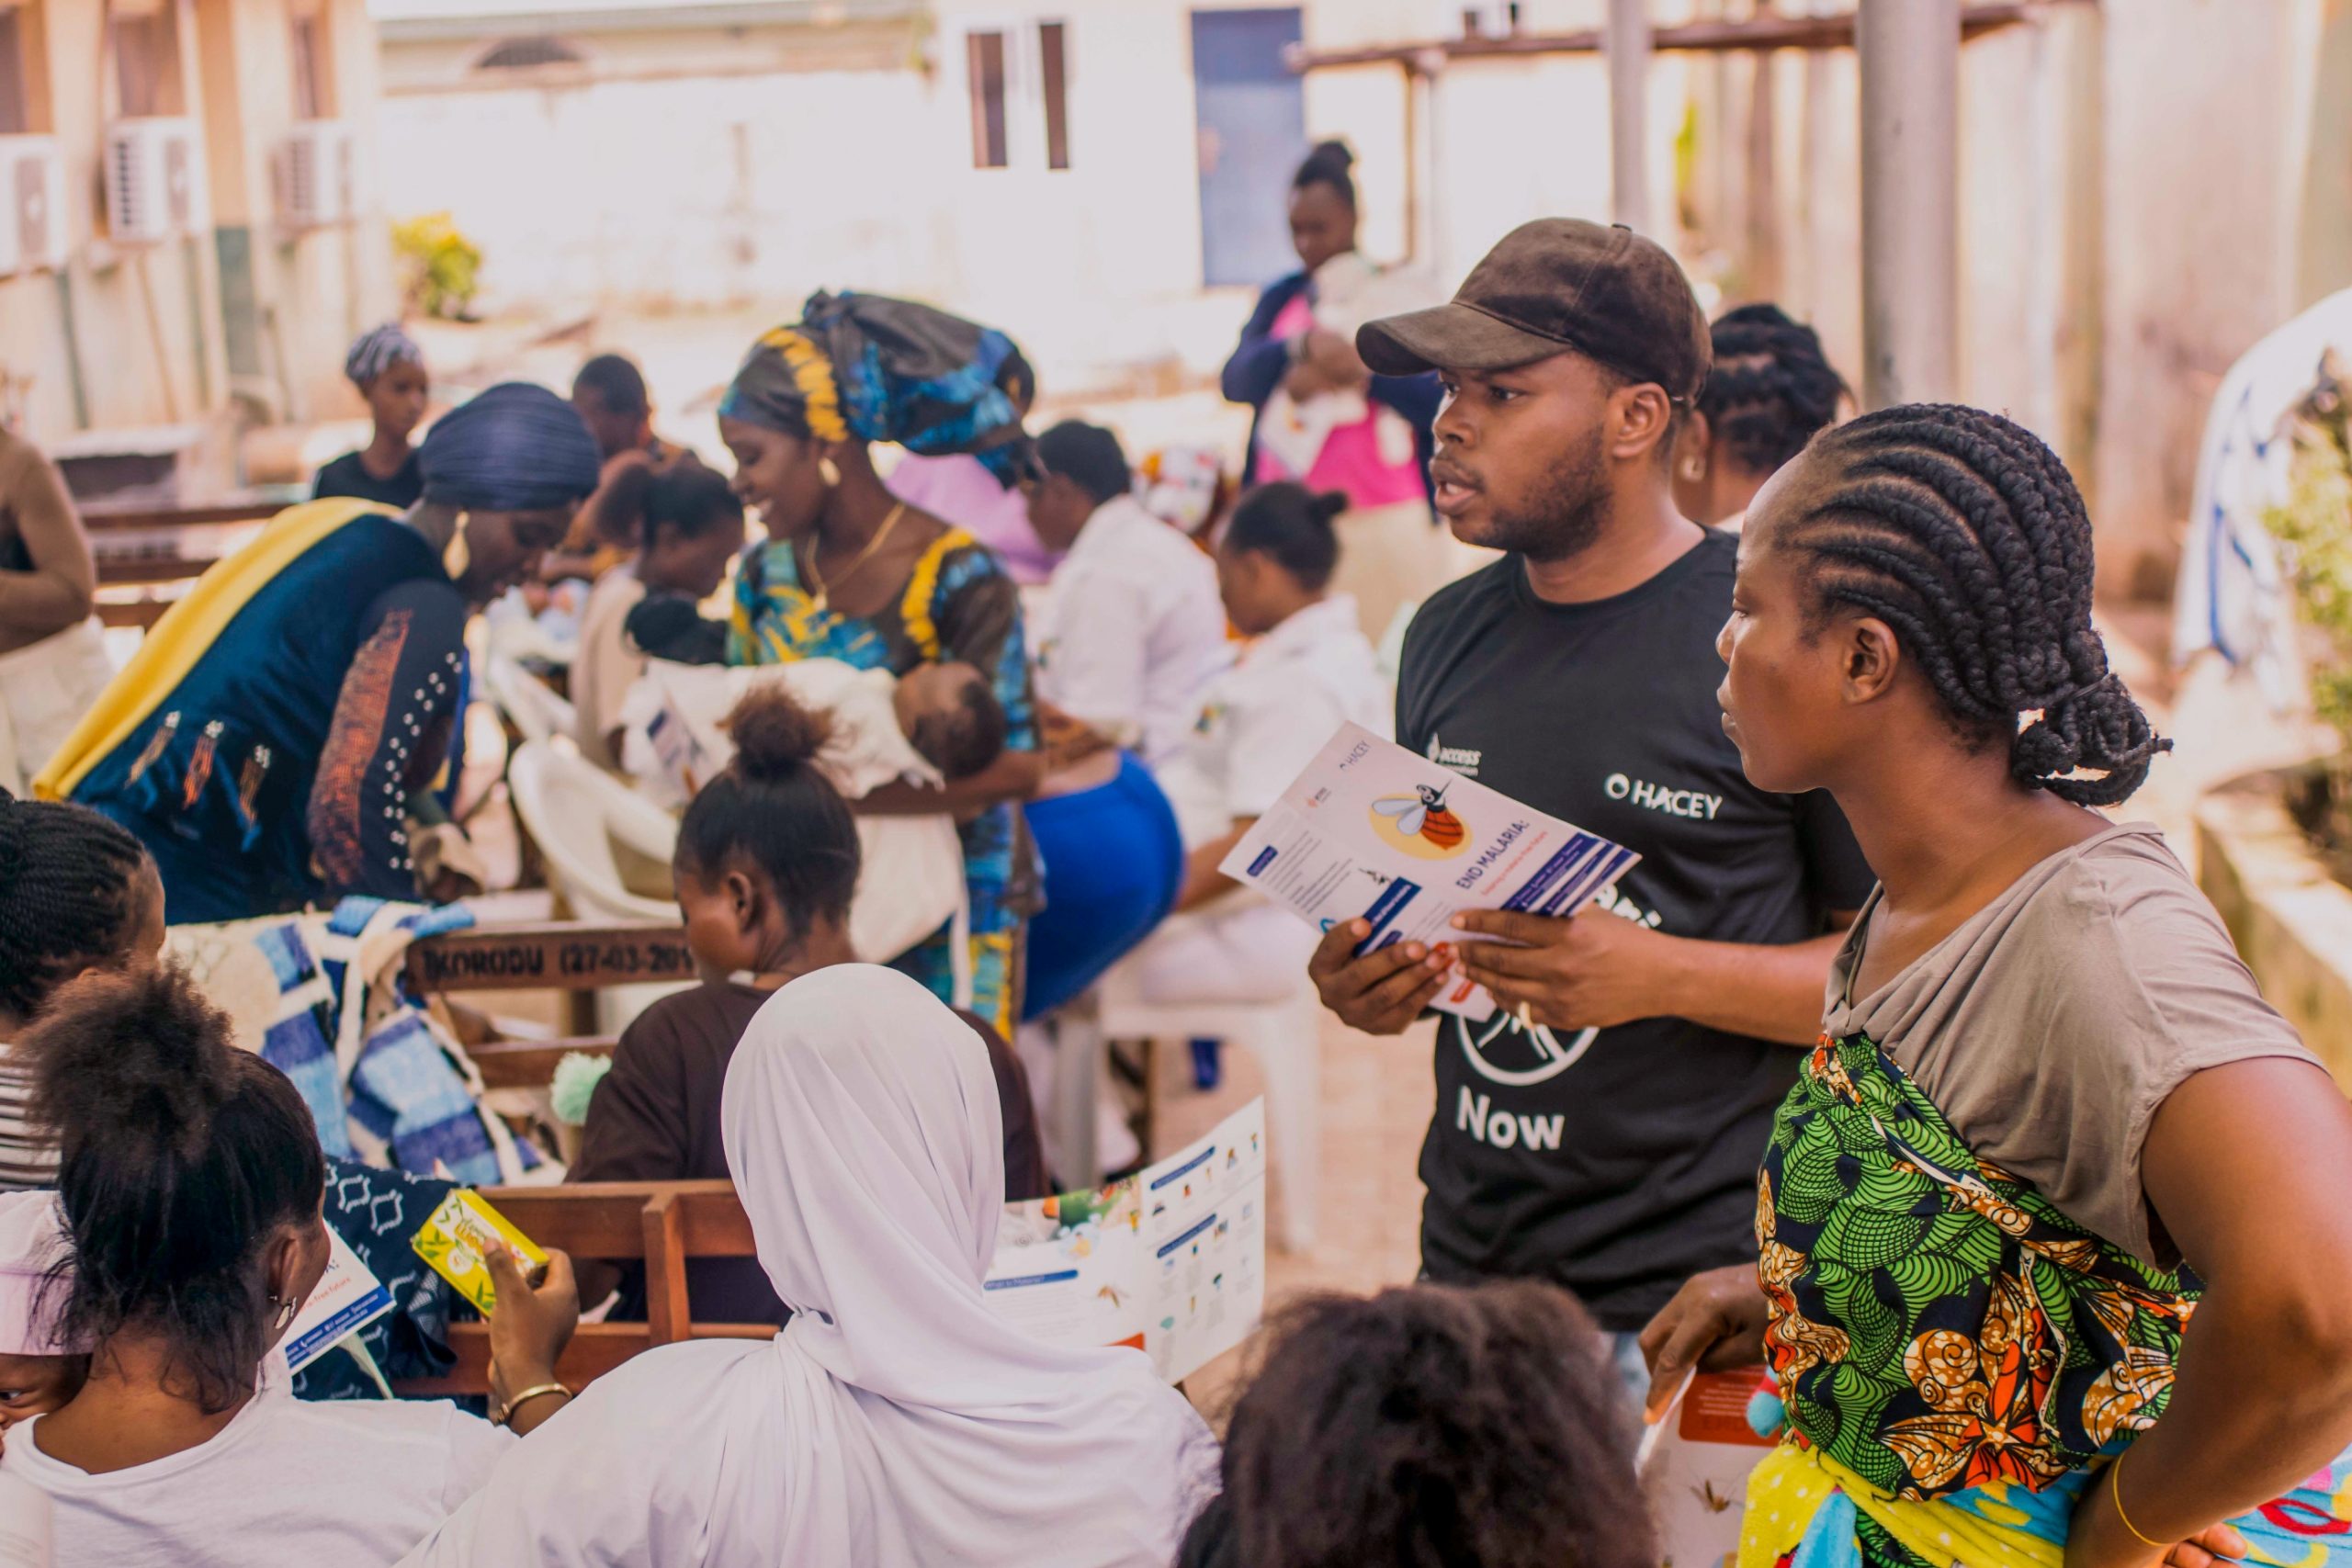 HACEY, Access Corporation organizes medical outreach to combat Malaria